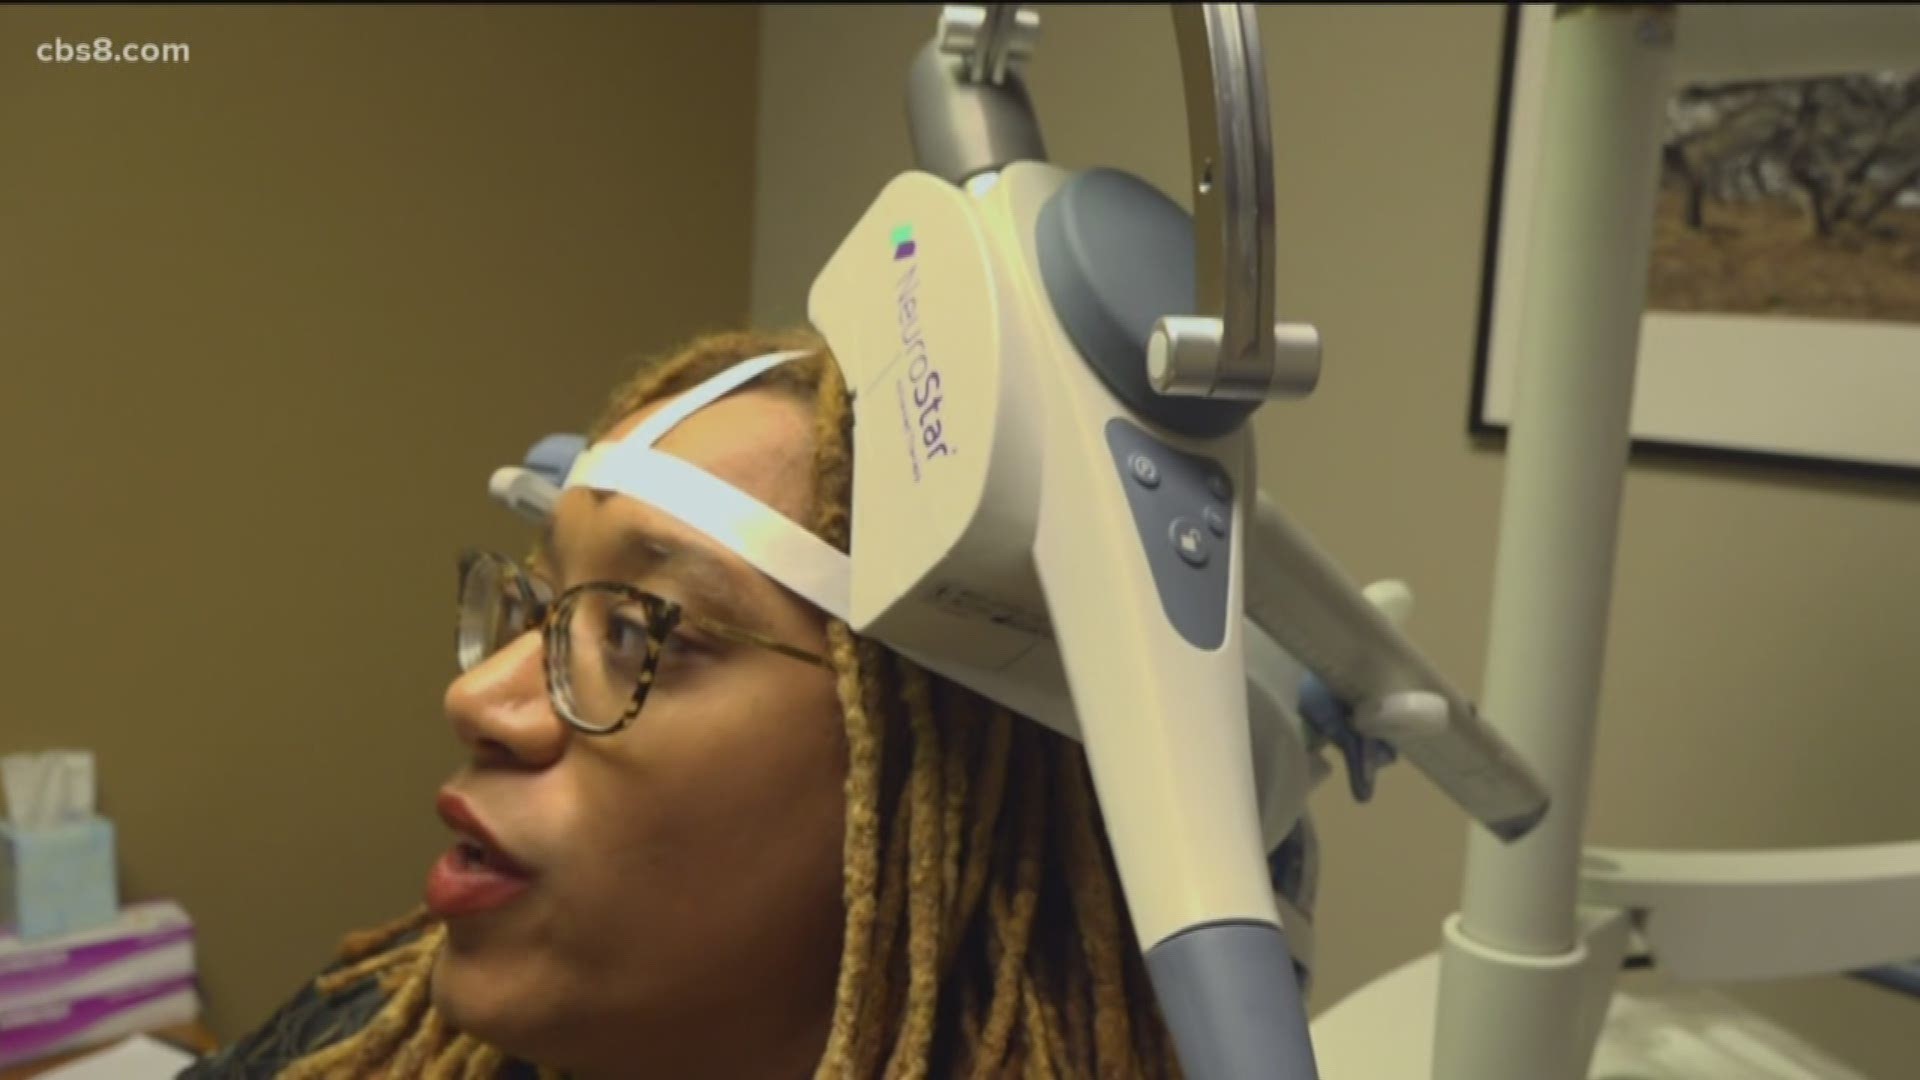 A little-known device could make all the difference. The treatment is called "Transcranial Magnetic Stimulation" or TMS. It's FDA-cleared and uses magnetic pulses